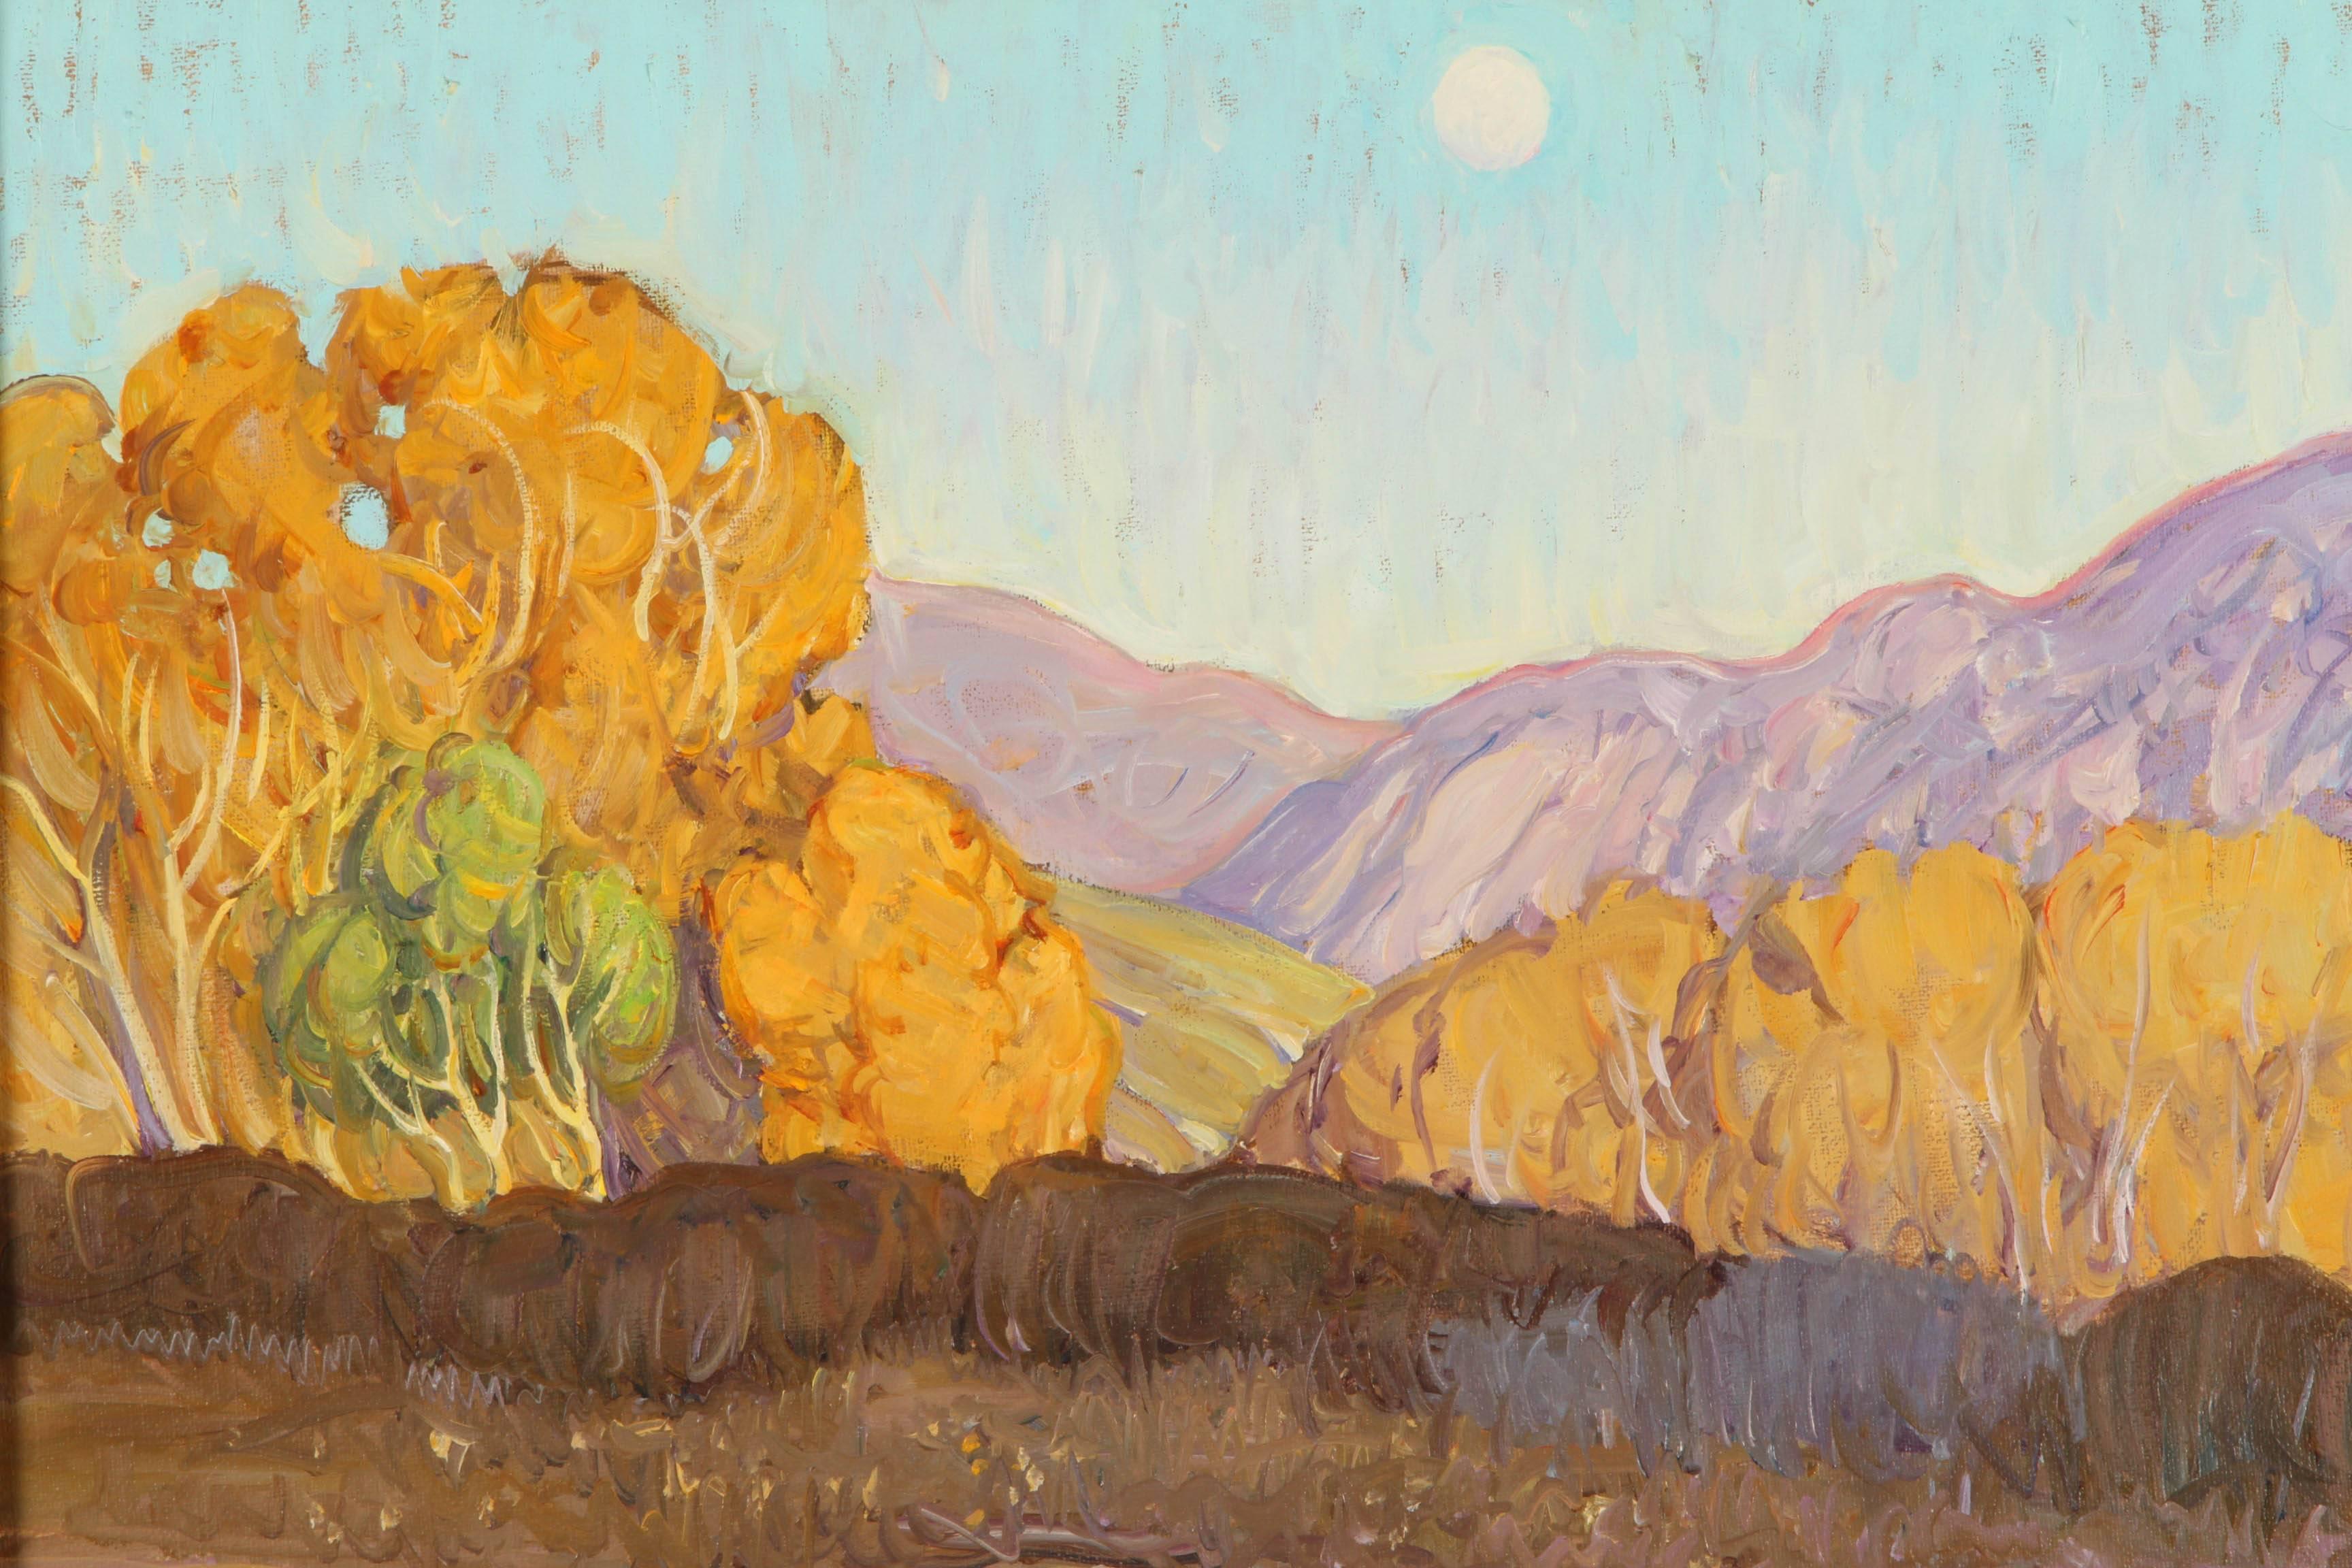 Autumn Twilight by Southwestern artist Tim Solliday. The painting is 20 